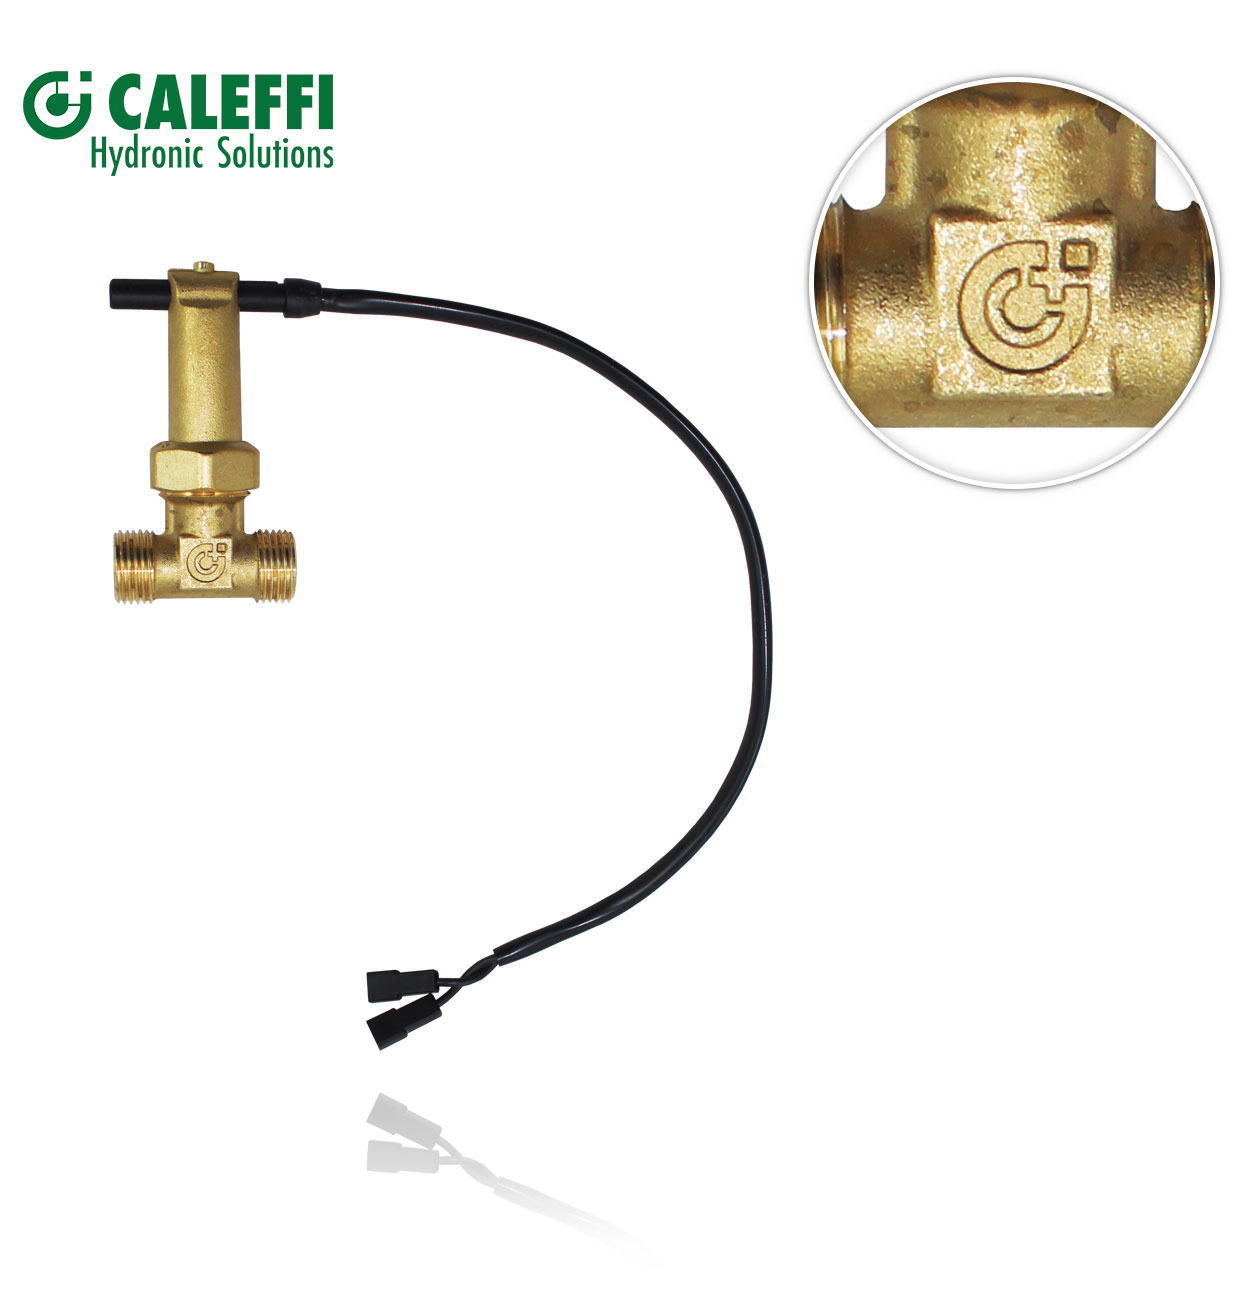 1/2” 315400 CALEFFI MAGNETIC FLOW SWITCH